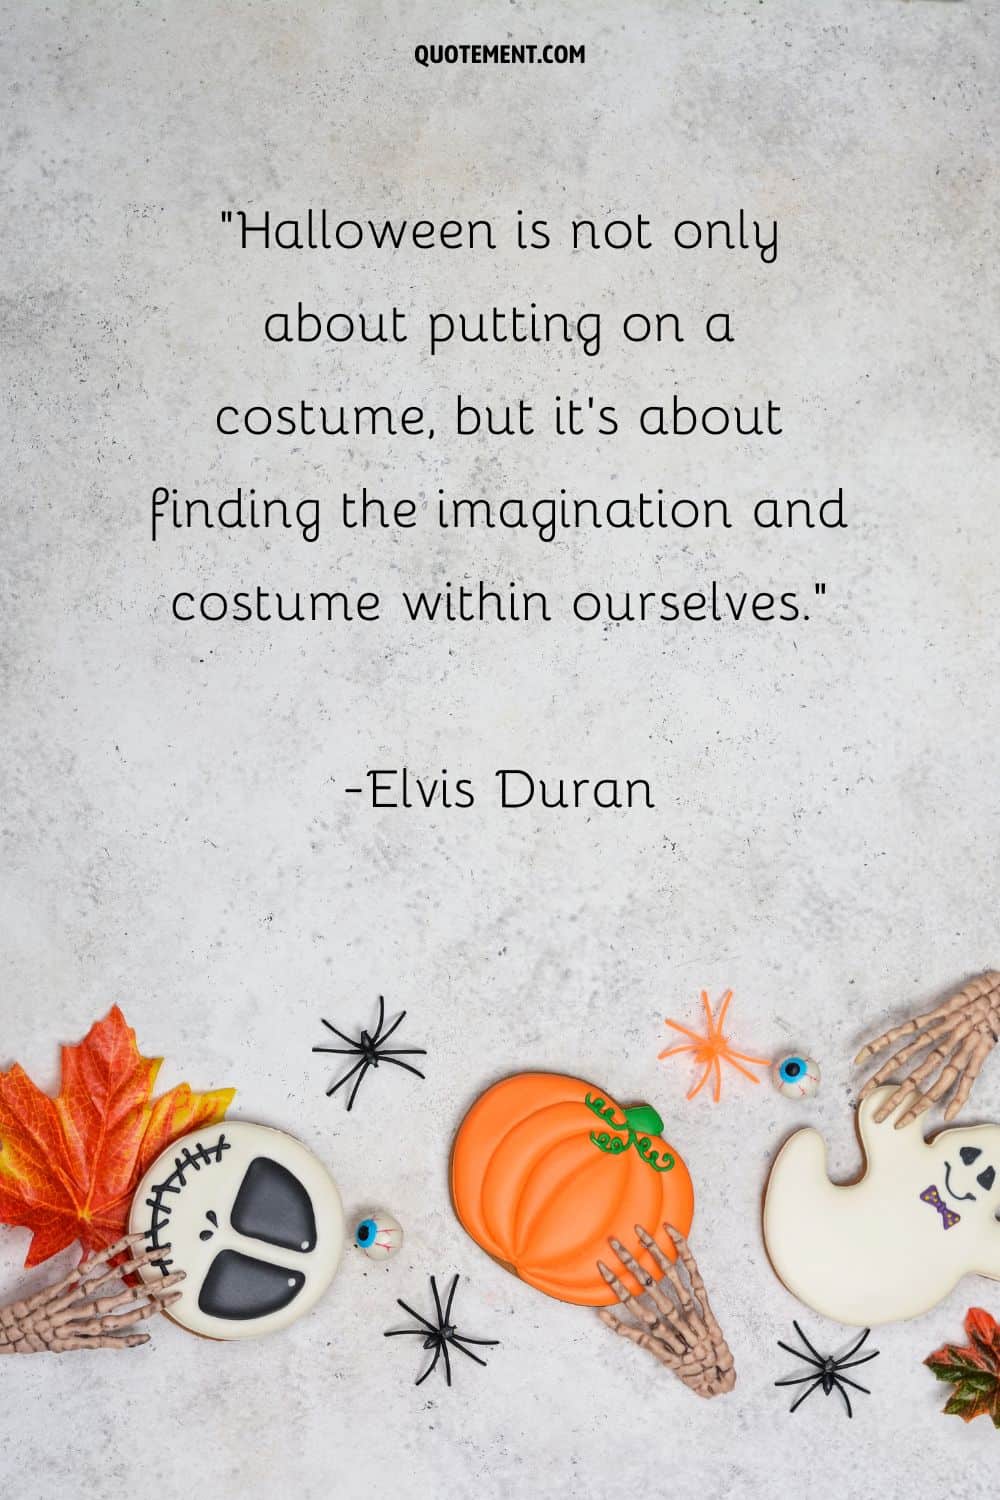 Halloween is not only about putting on a costume, but it's about finding the imagination and costume within ourselves